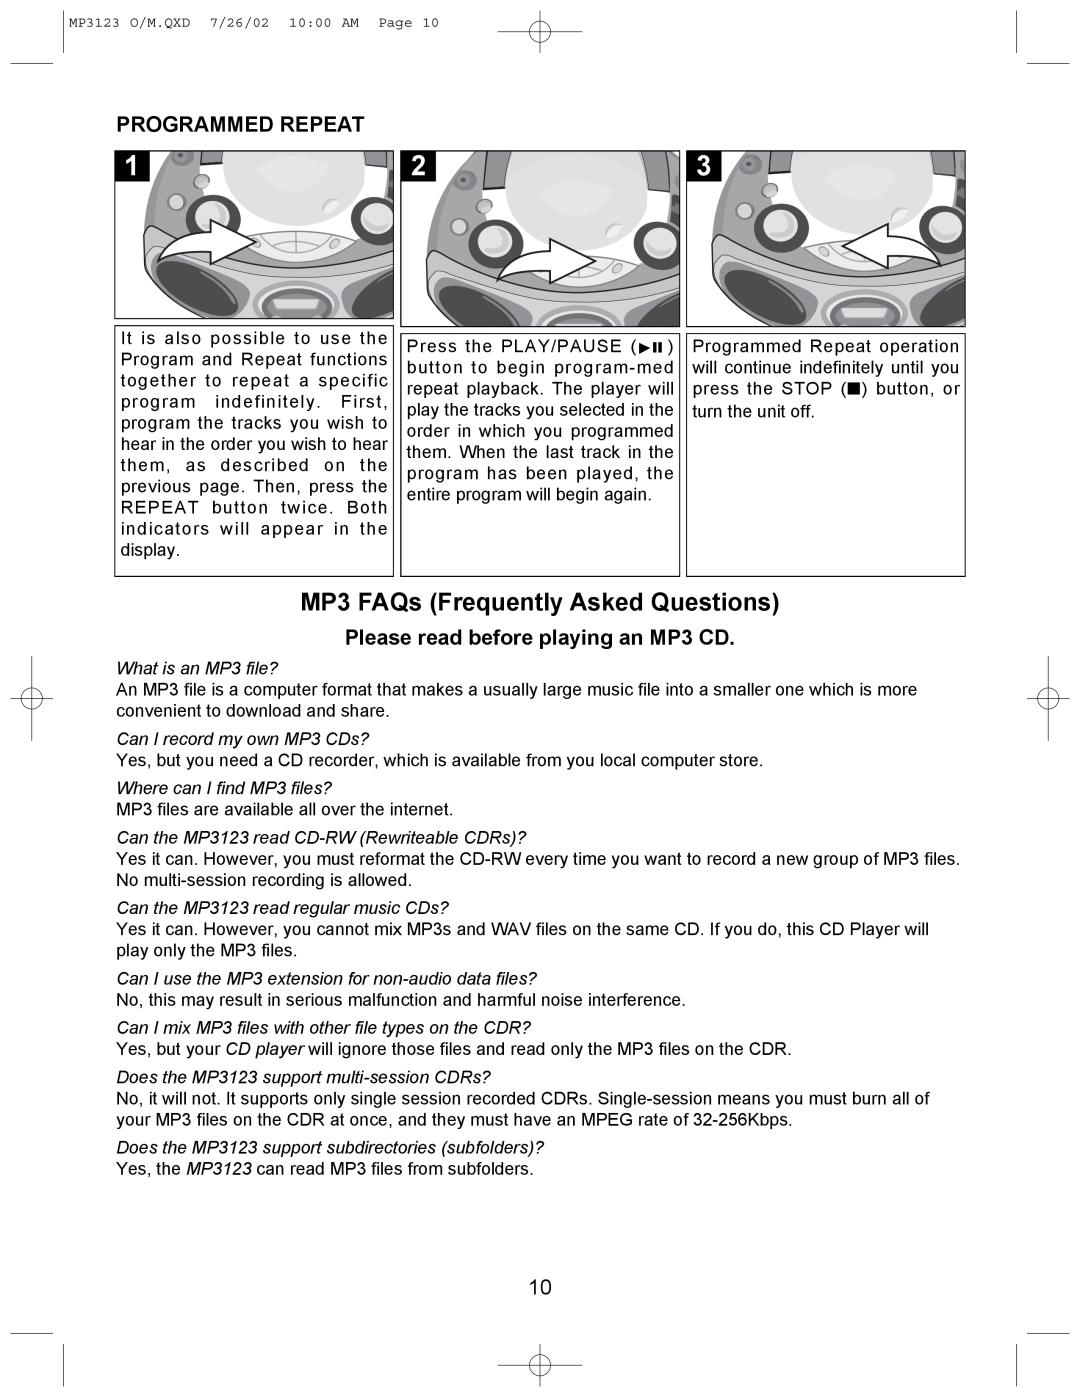 Memorex MP3123 manual MP3 FAQs Frequently Asked Questions, Programmed Repeat, Please read before playing an MP3 CD 